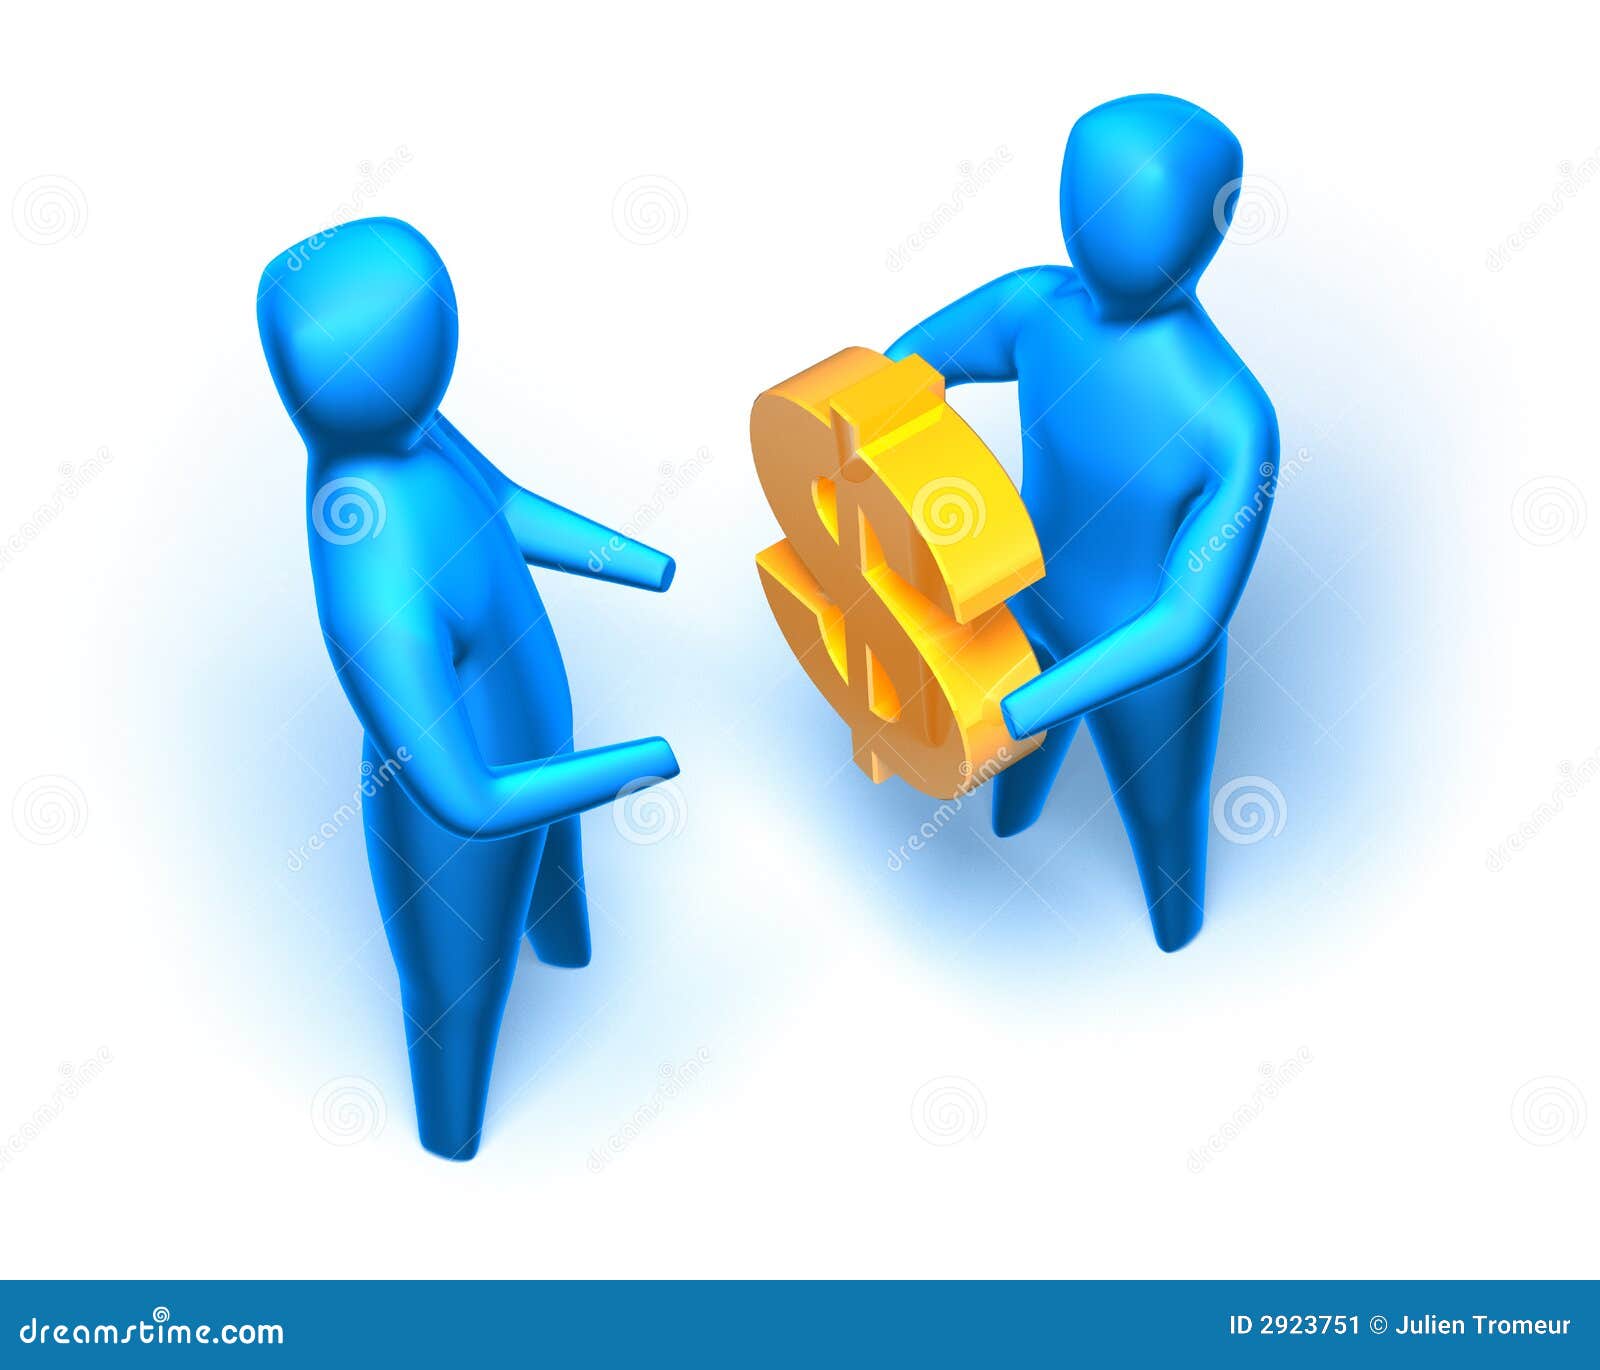 business deal clipart - photo #24